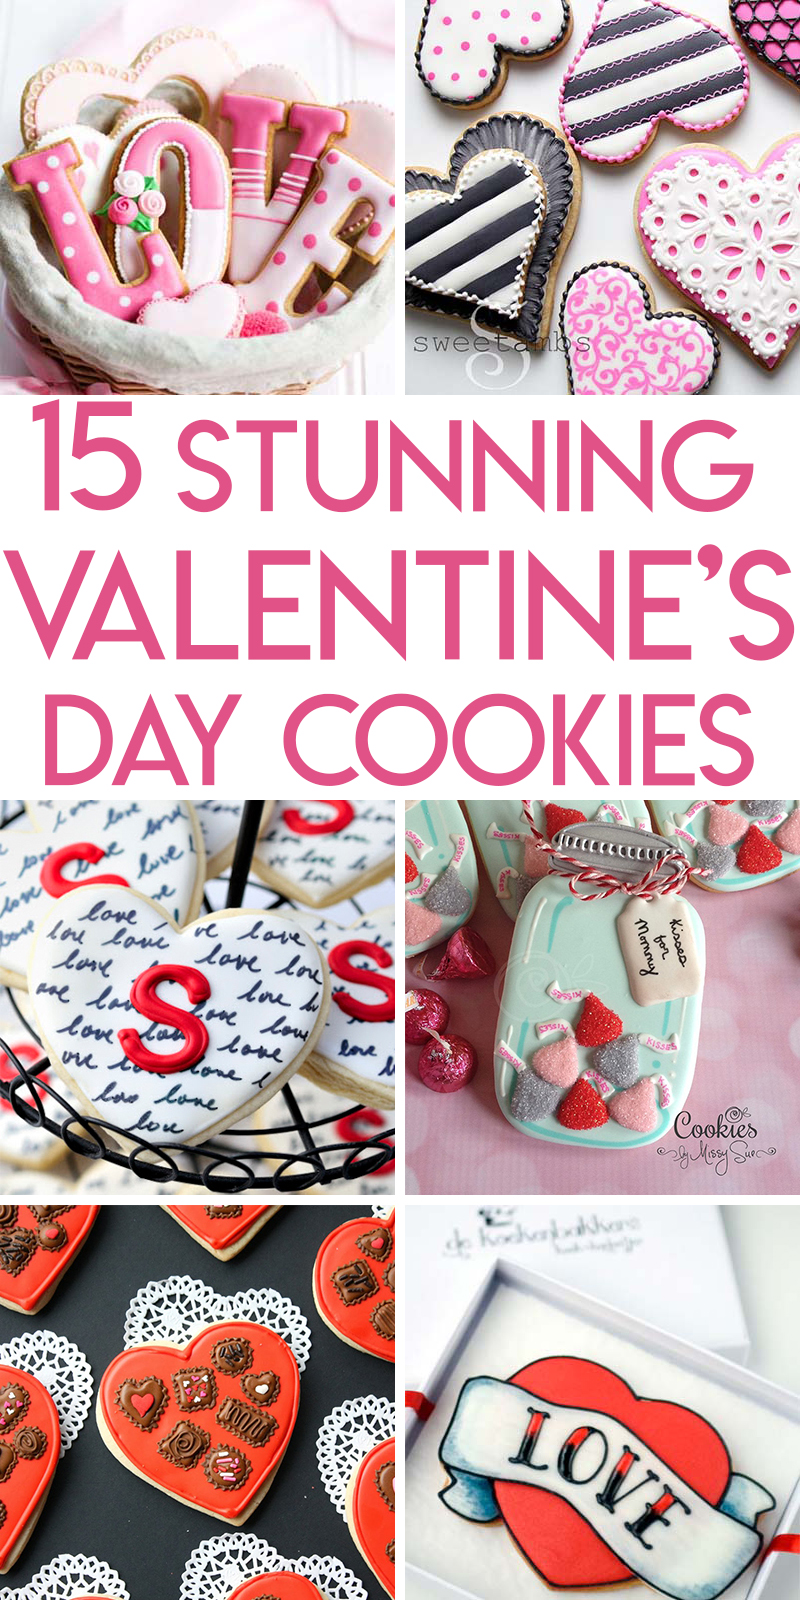 15 Beautifully Decorated Valentine’s Day Sugar Cookies | Random Acts of ...